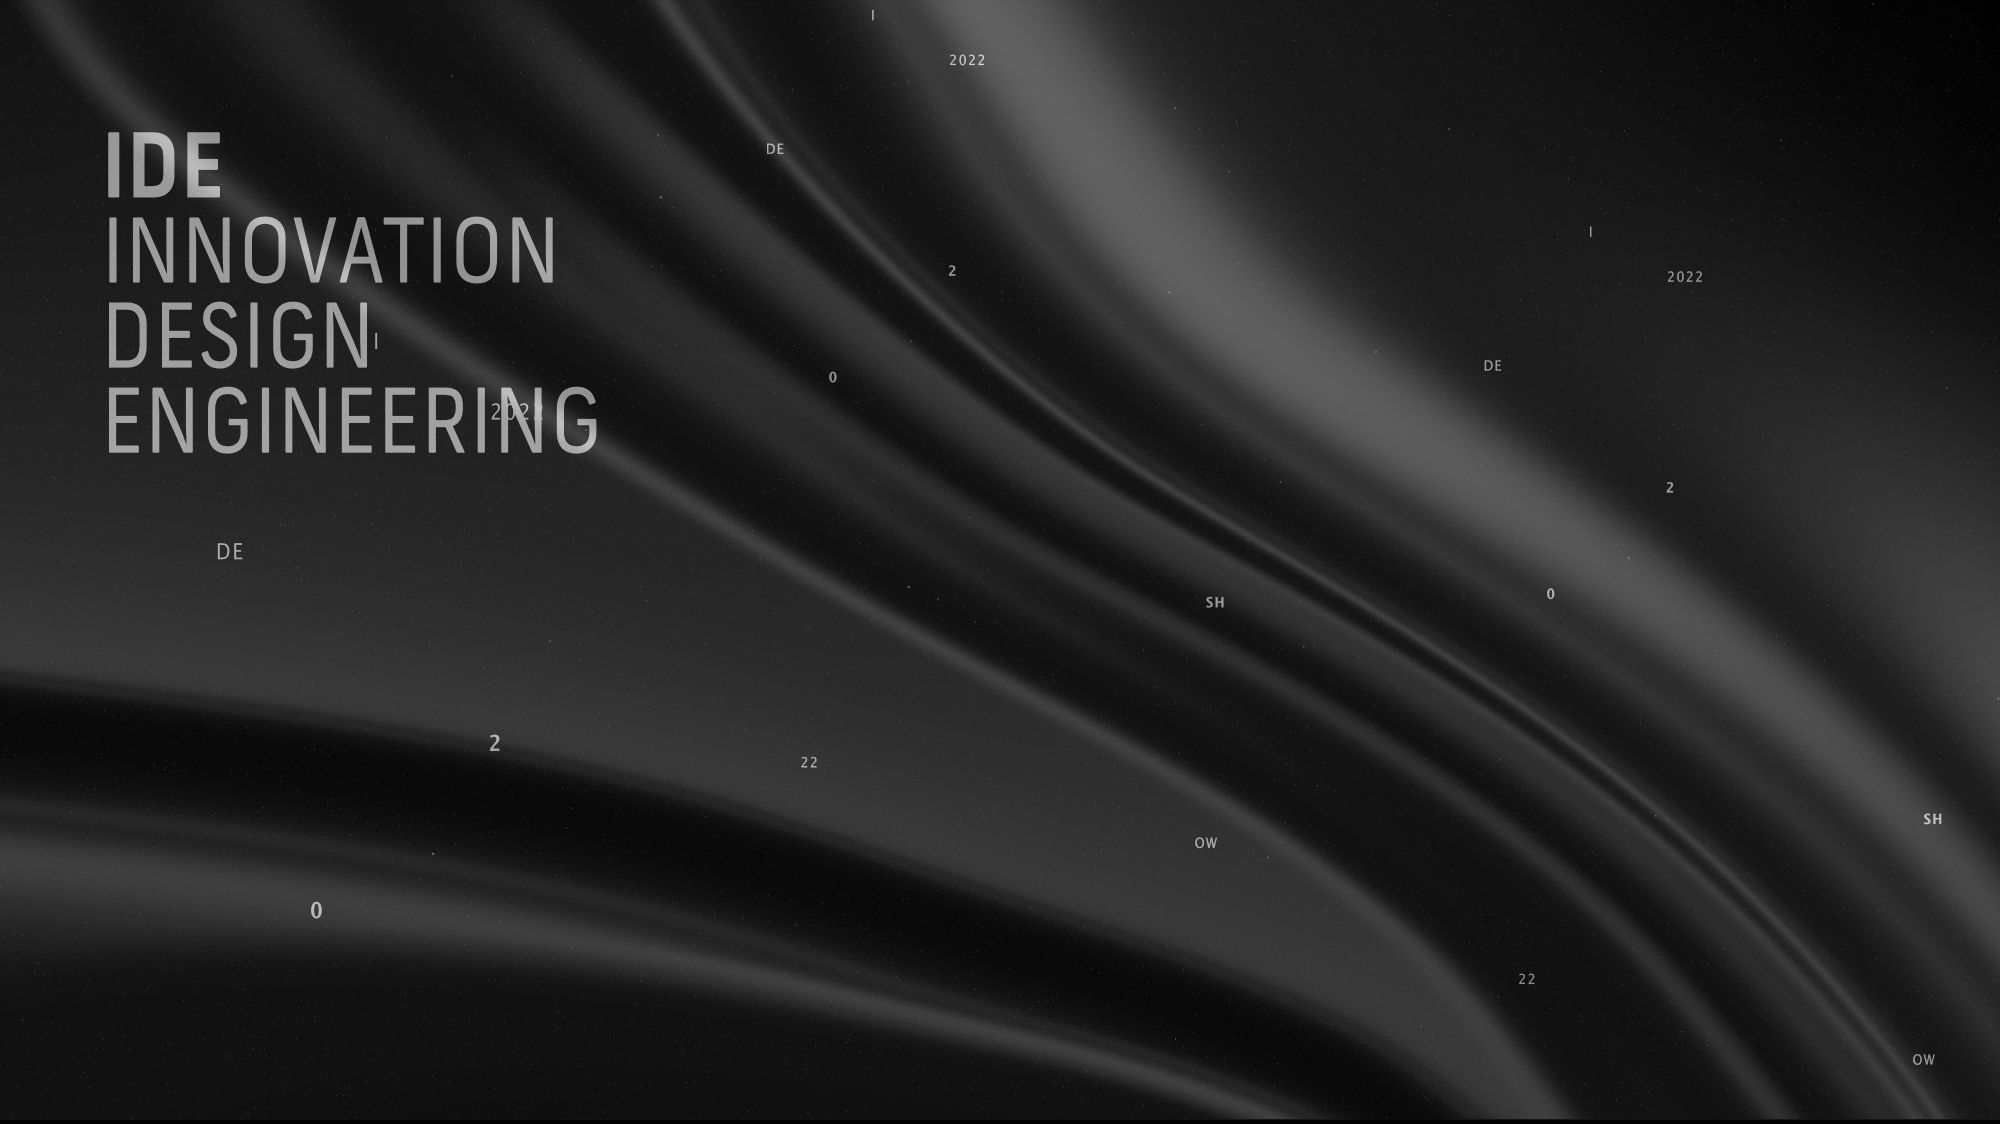 Image of text reading 'I D E Innovation Design Engineering' and tiny text dotted all over, including the number '22' and the letters 'D E', on a black and charcoal coloured rippled background.